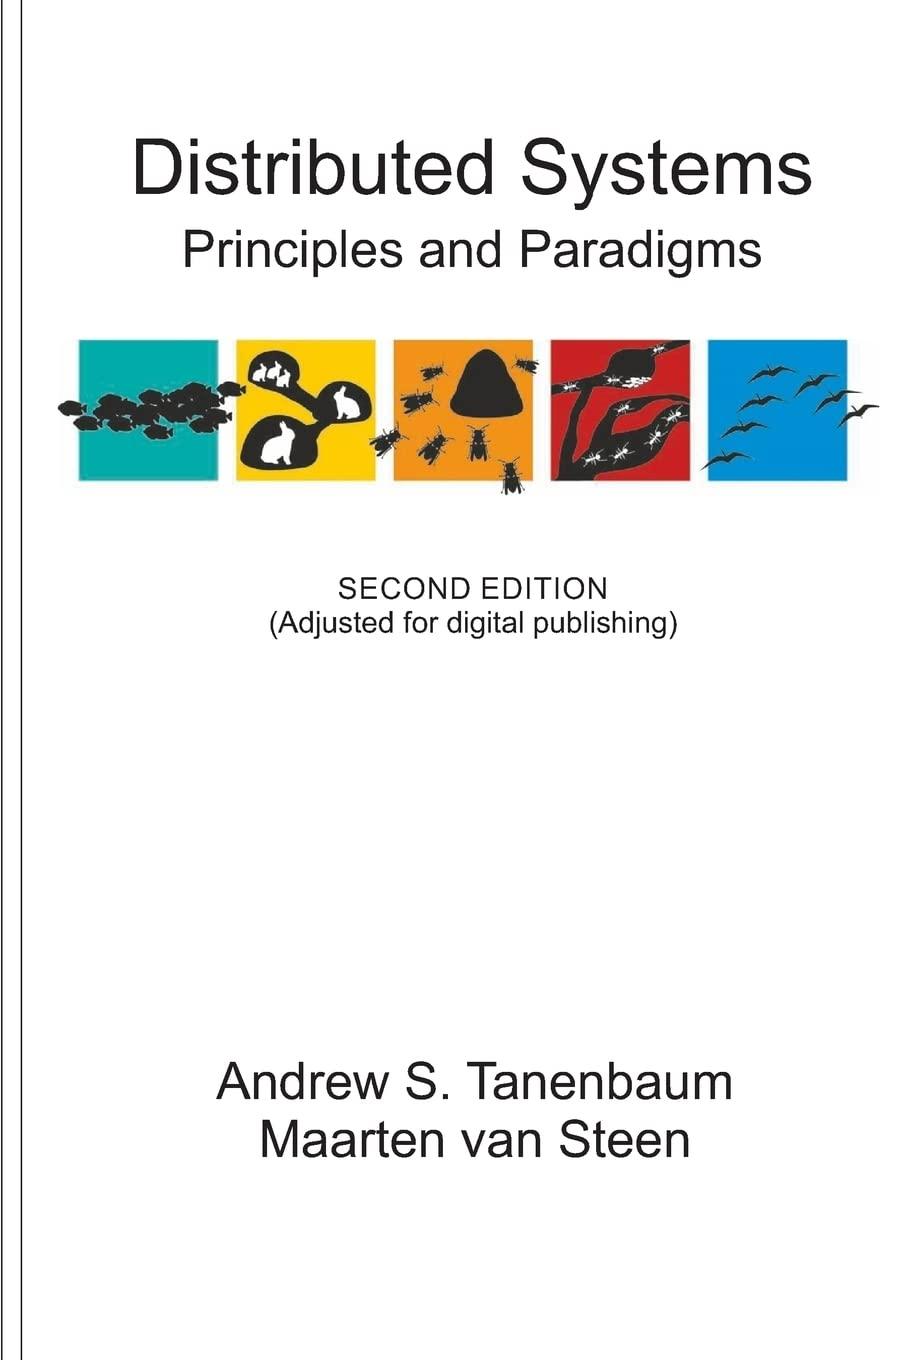 distributed systems principles and paradigms 2nd edition andrew s. tanenbaum, maarten van steen 153028175x,